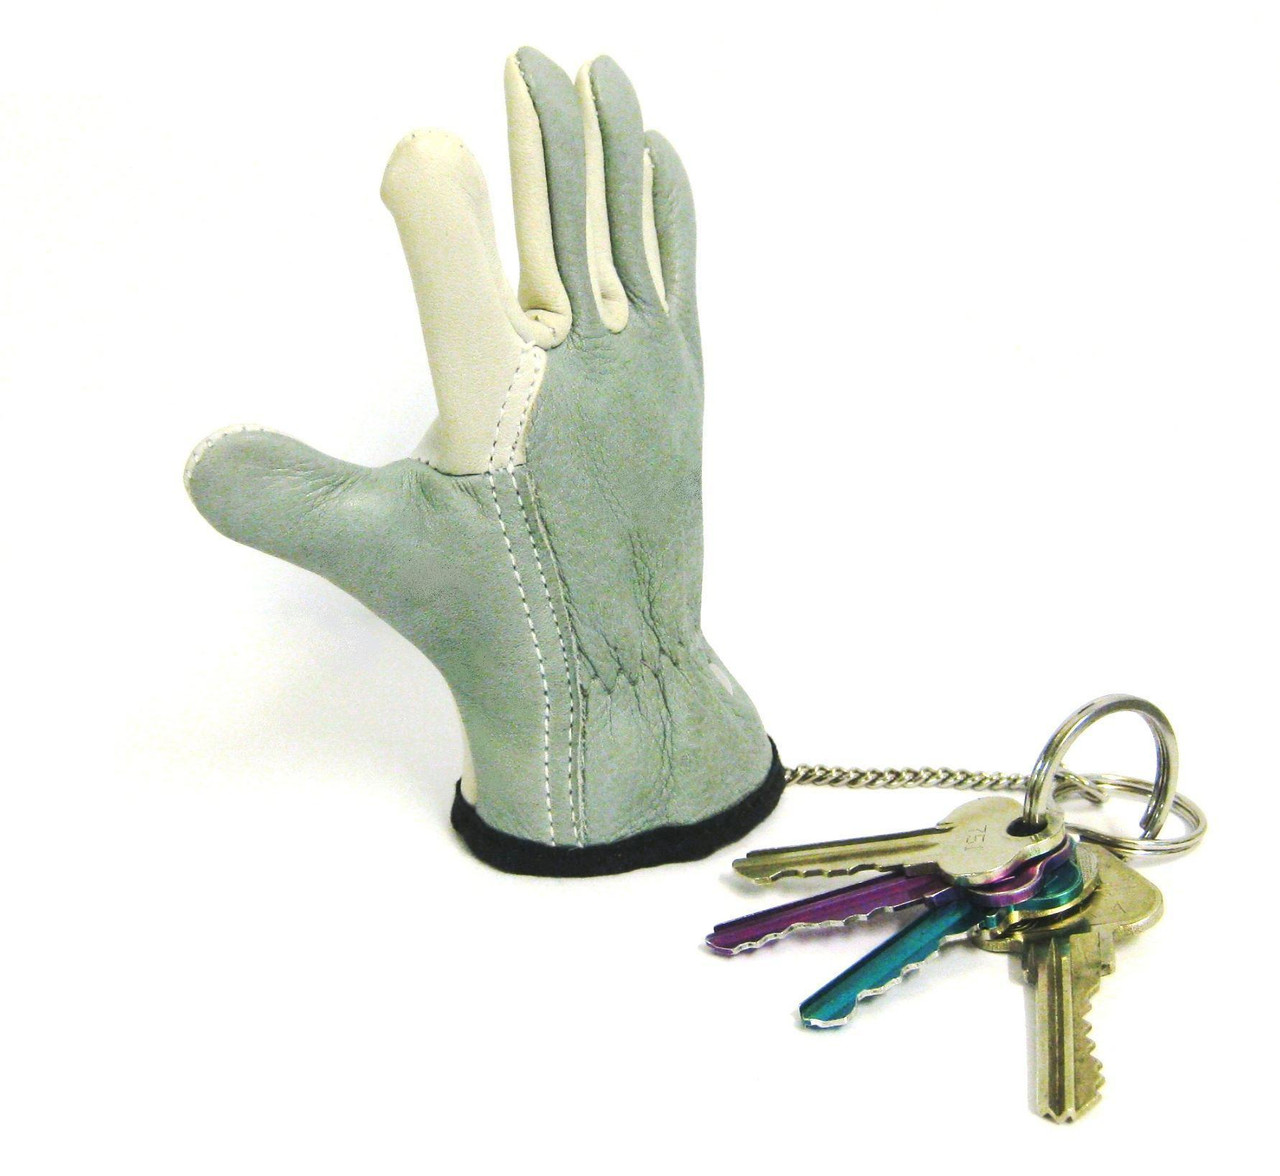 Maxisafe Keyring Riggers Glove - Right Hand